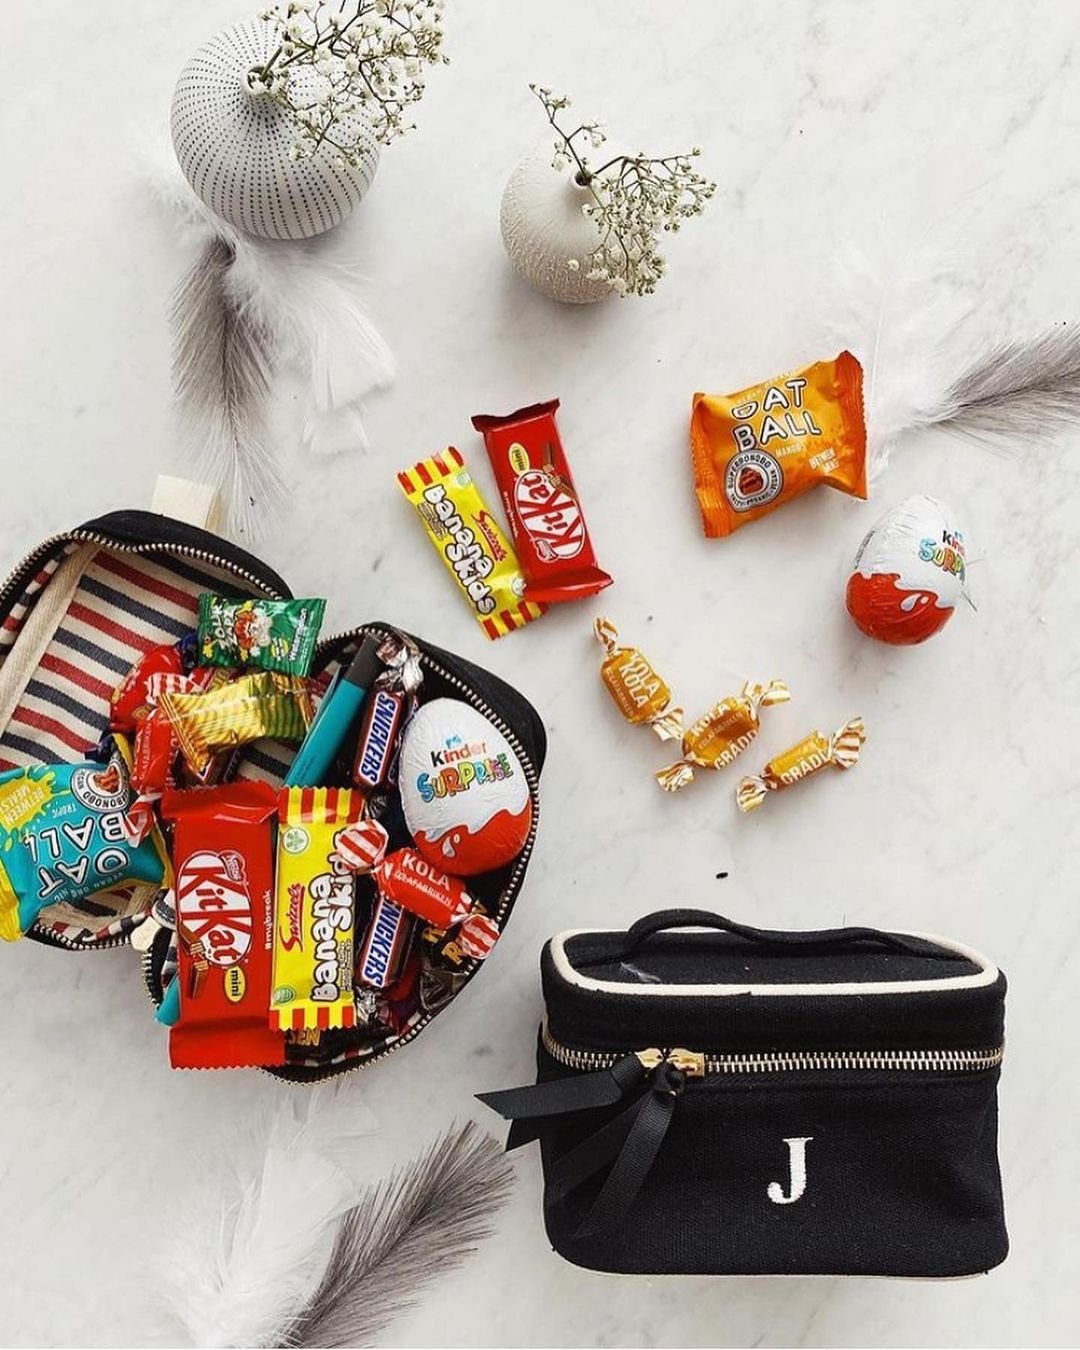 Sustainable Halloween Treats: Bag-all's Eco-Friendly Candy Bags for a Greener Celebration